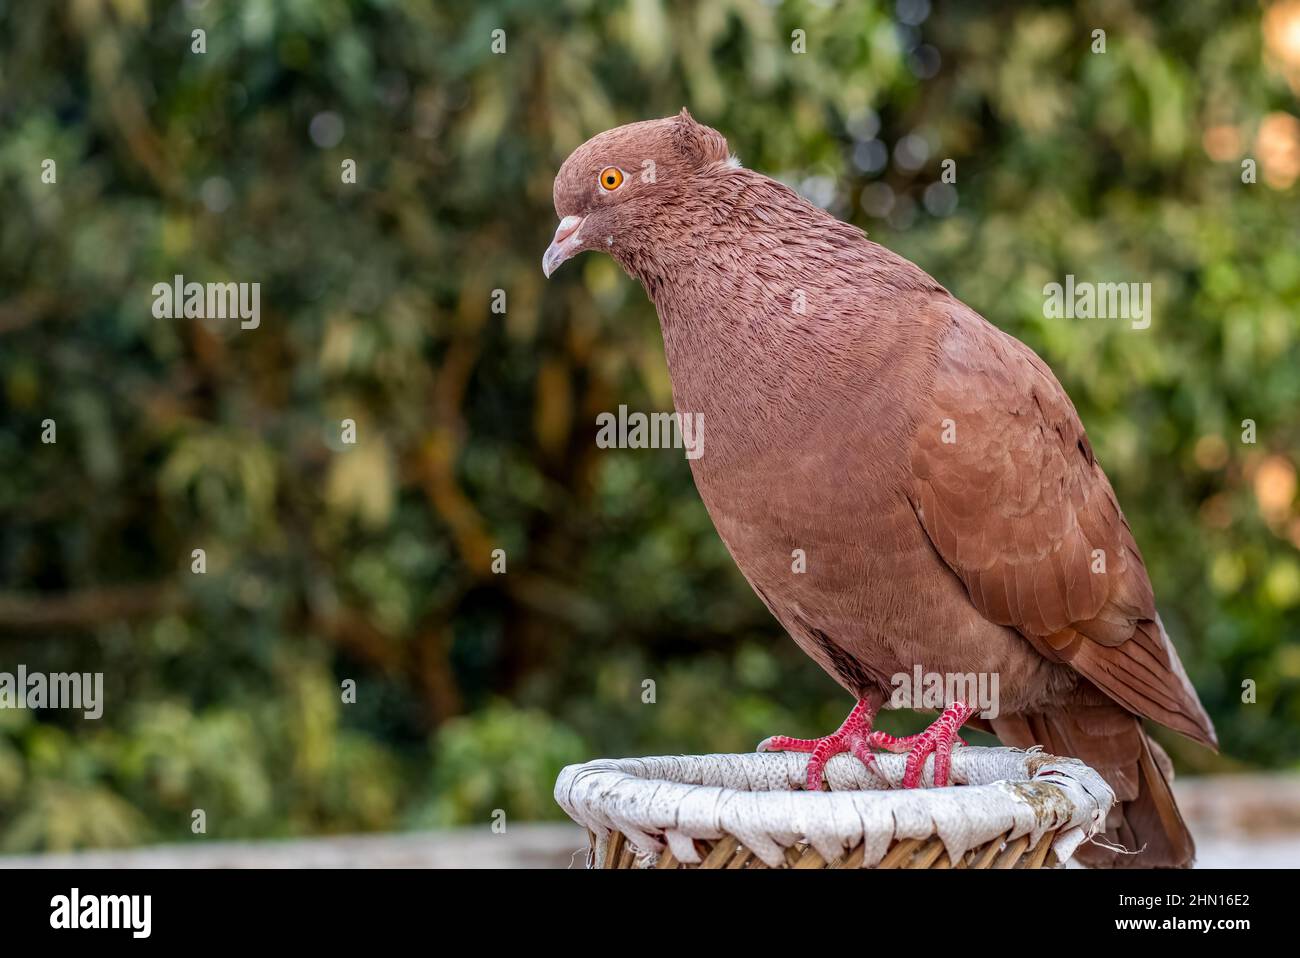 A domestic red pigeon standing on a bamboo cage close up shot Stock Photo